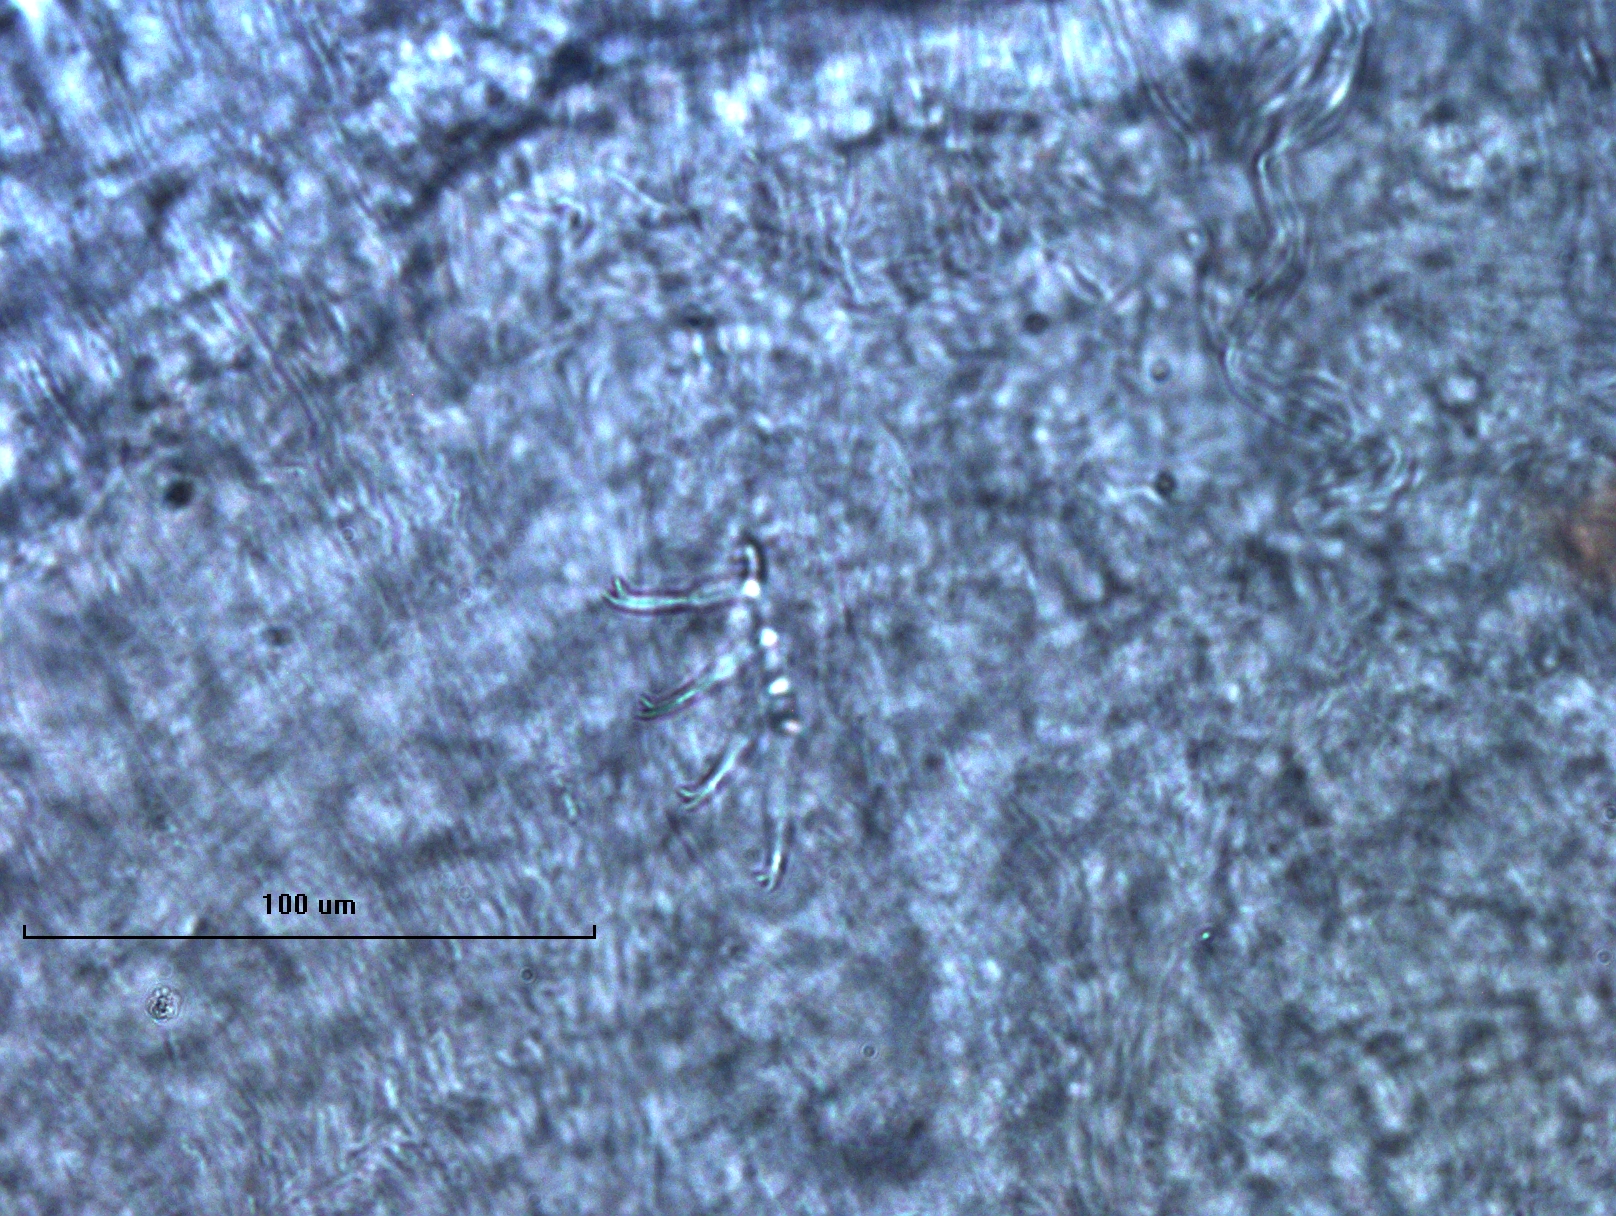 photomicrograph of the chaetae of a worm, which are bifid with the upper tooth shorter and thinner than the lower tooth.